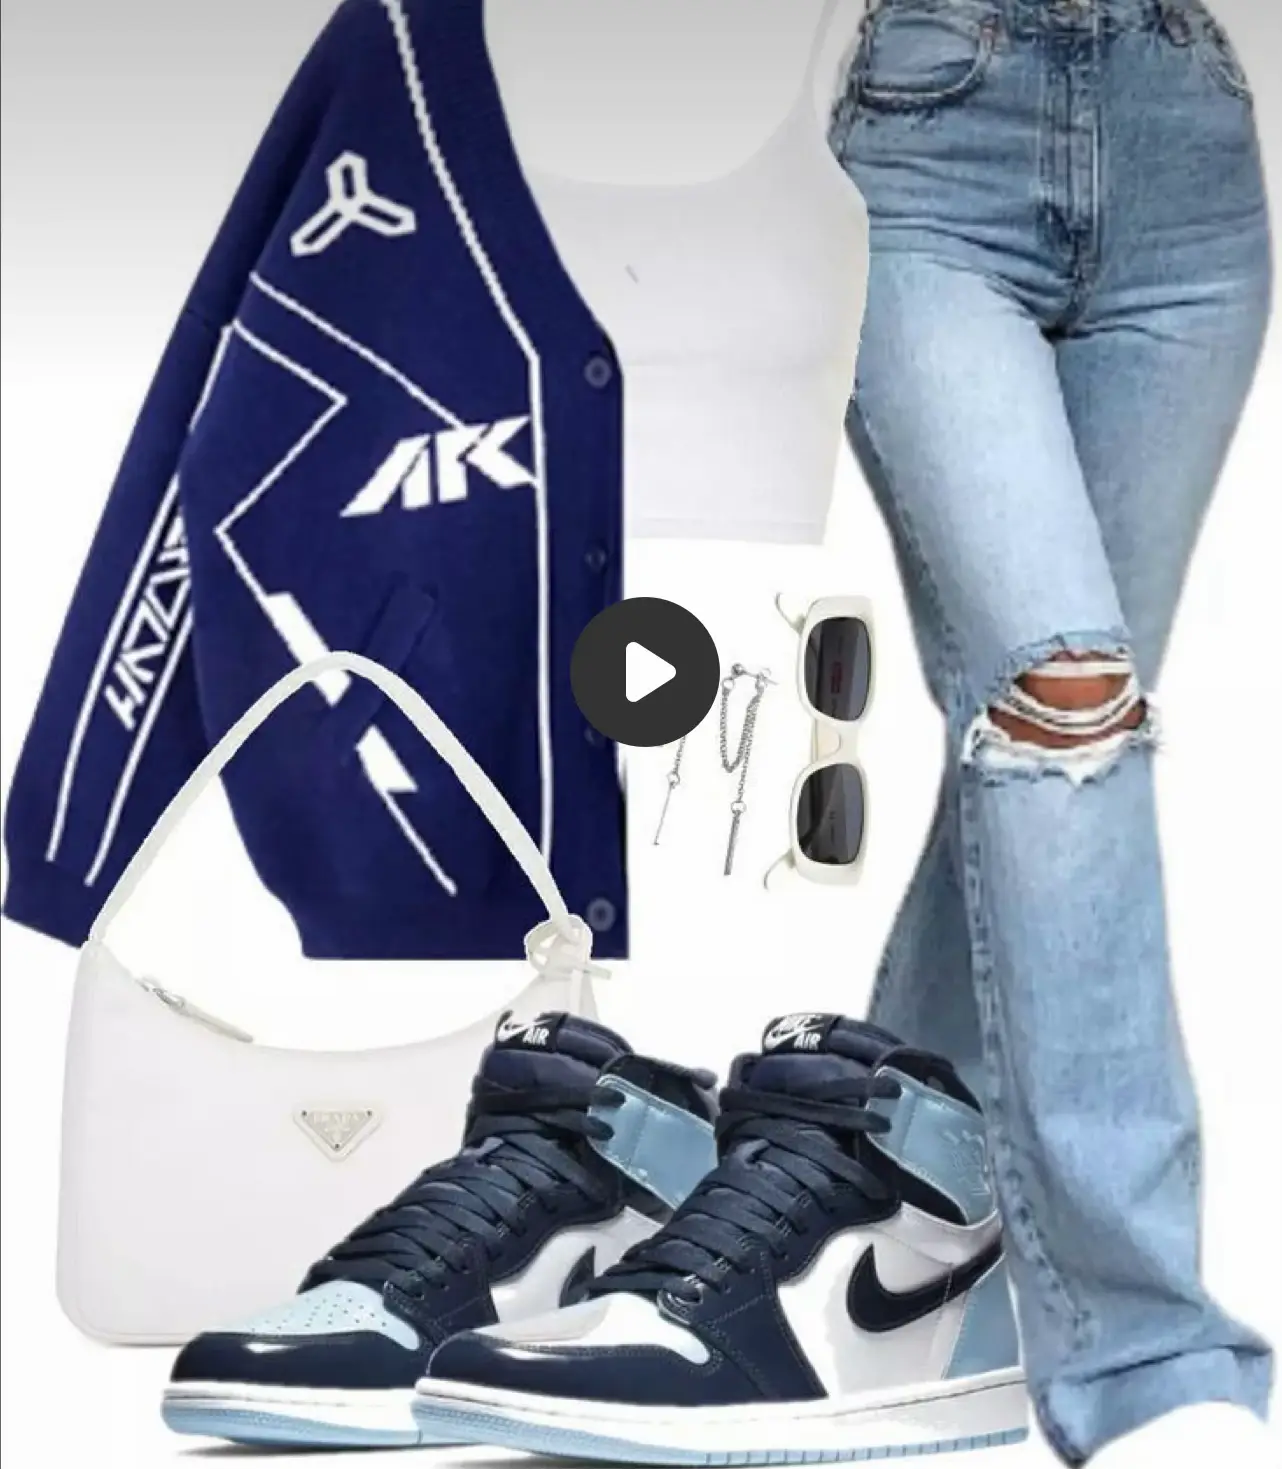 Jordan 1 Outfit Women  Jordan 1 outfit women, Air jordan outfit